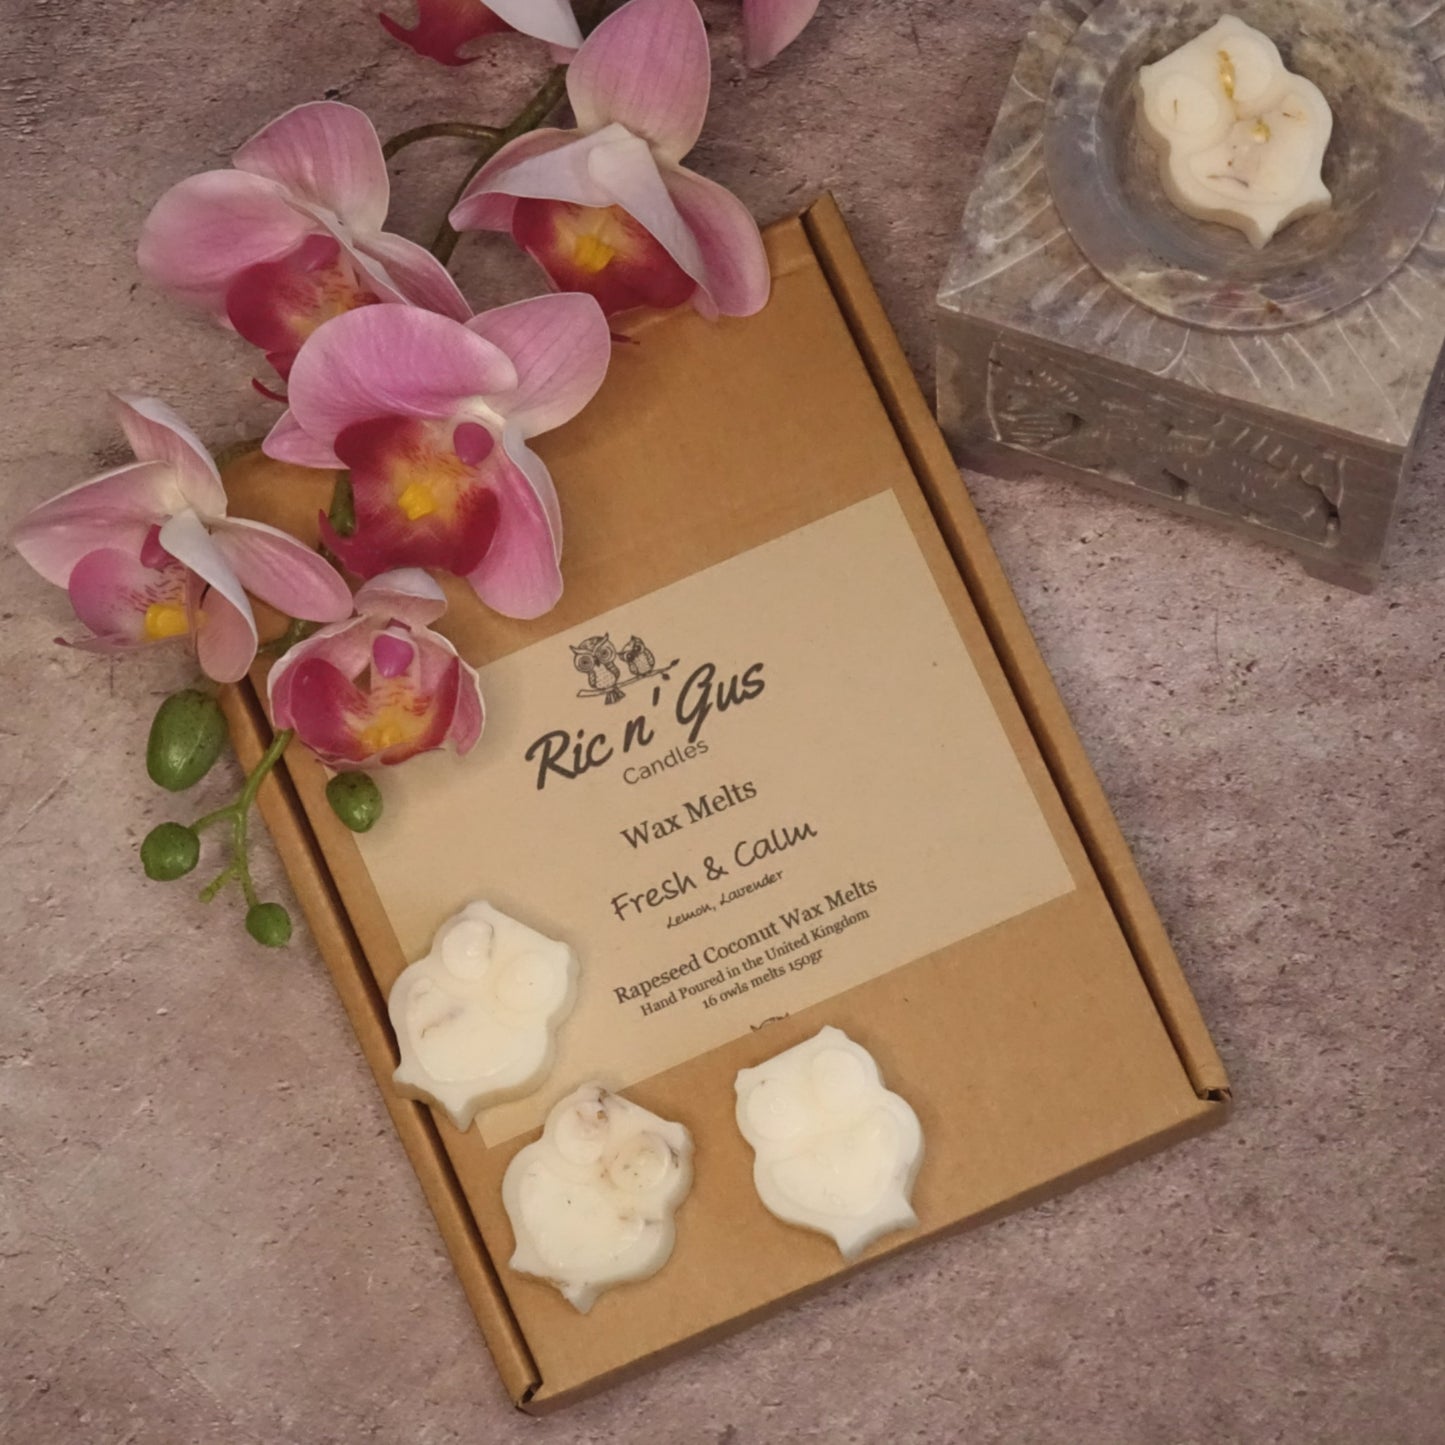 natural highly scented wax melts ric n'gus candles fresh and calm lemon and lavender 1